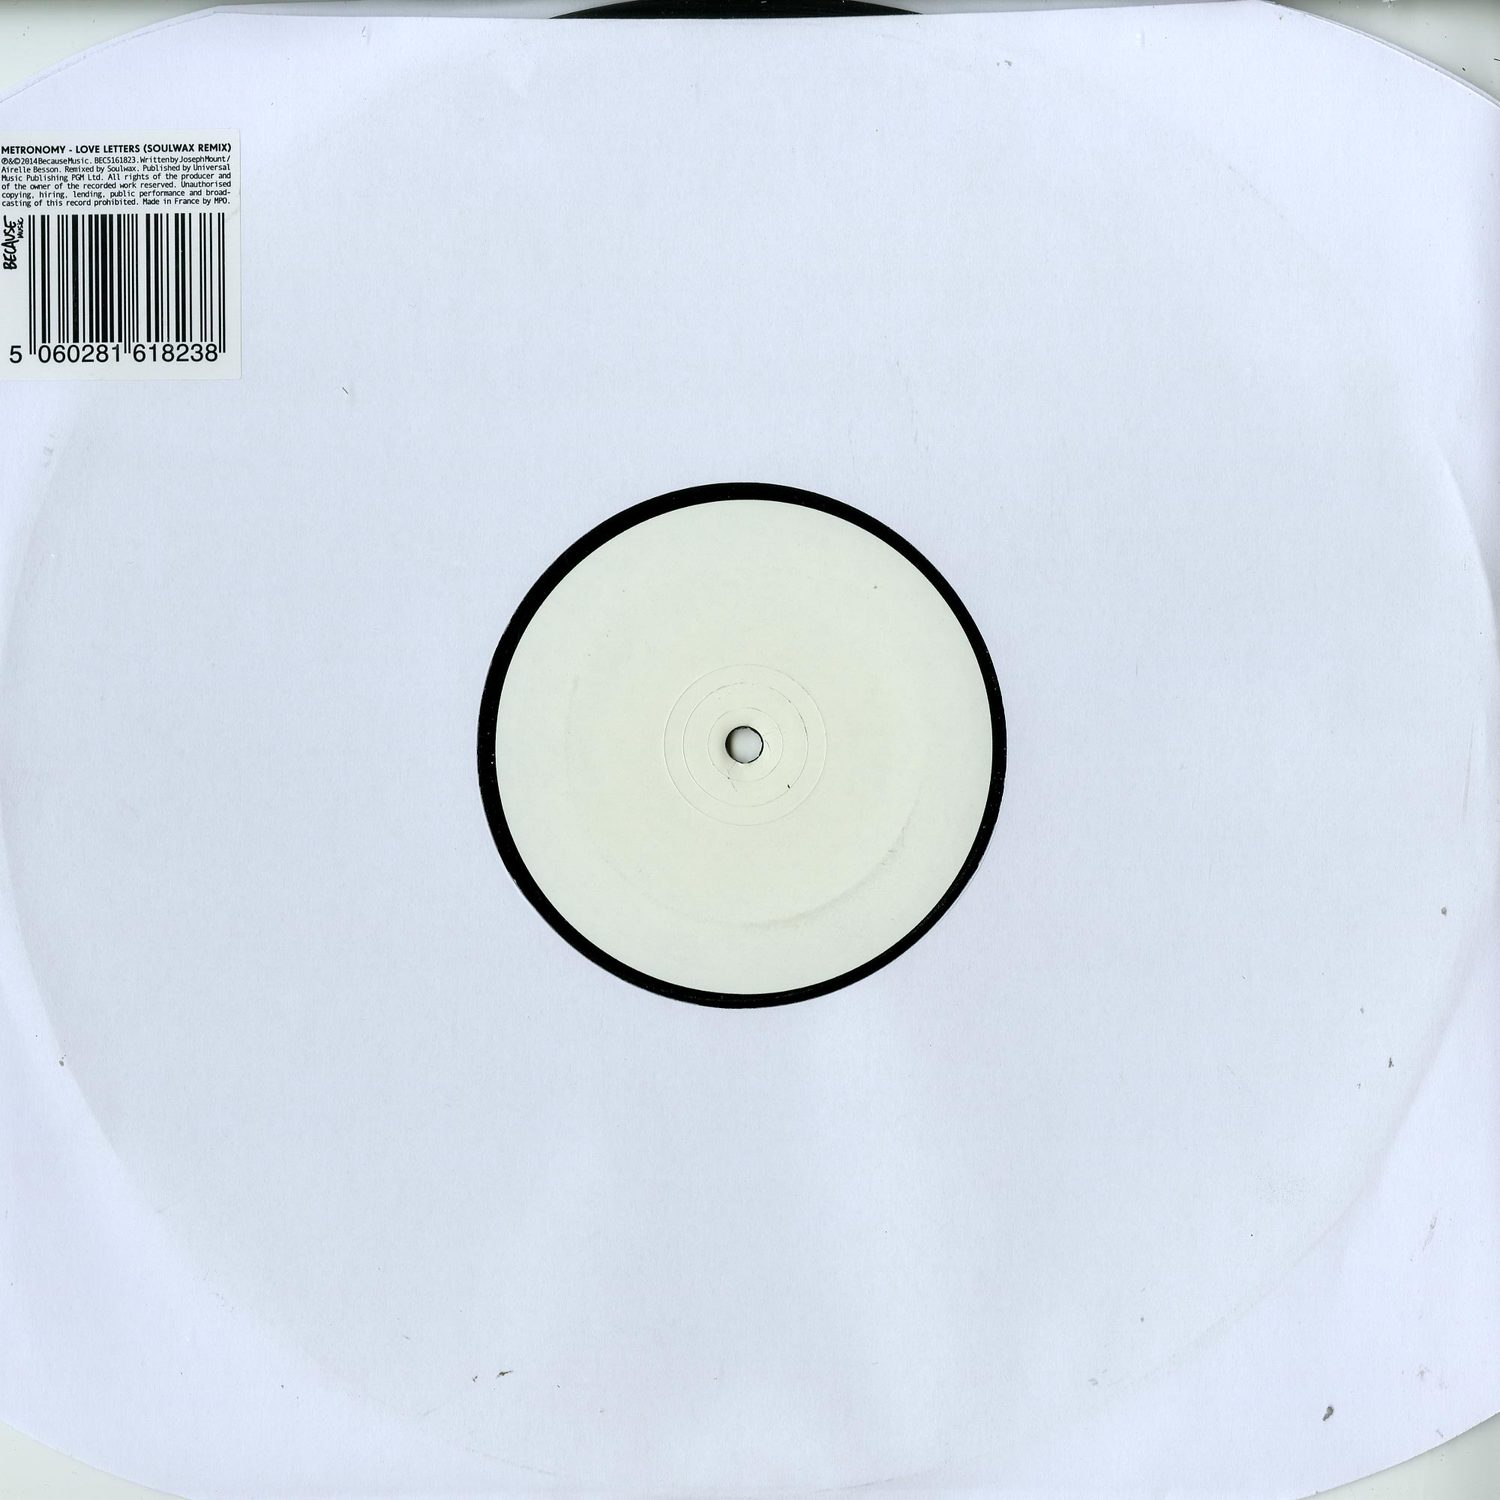 Metronomy - LOVE LETTERS SOULWAX RMX, ETCHED VINYL